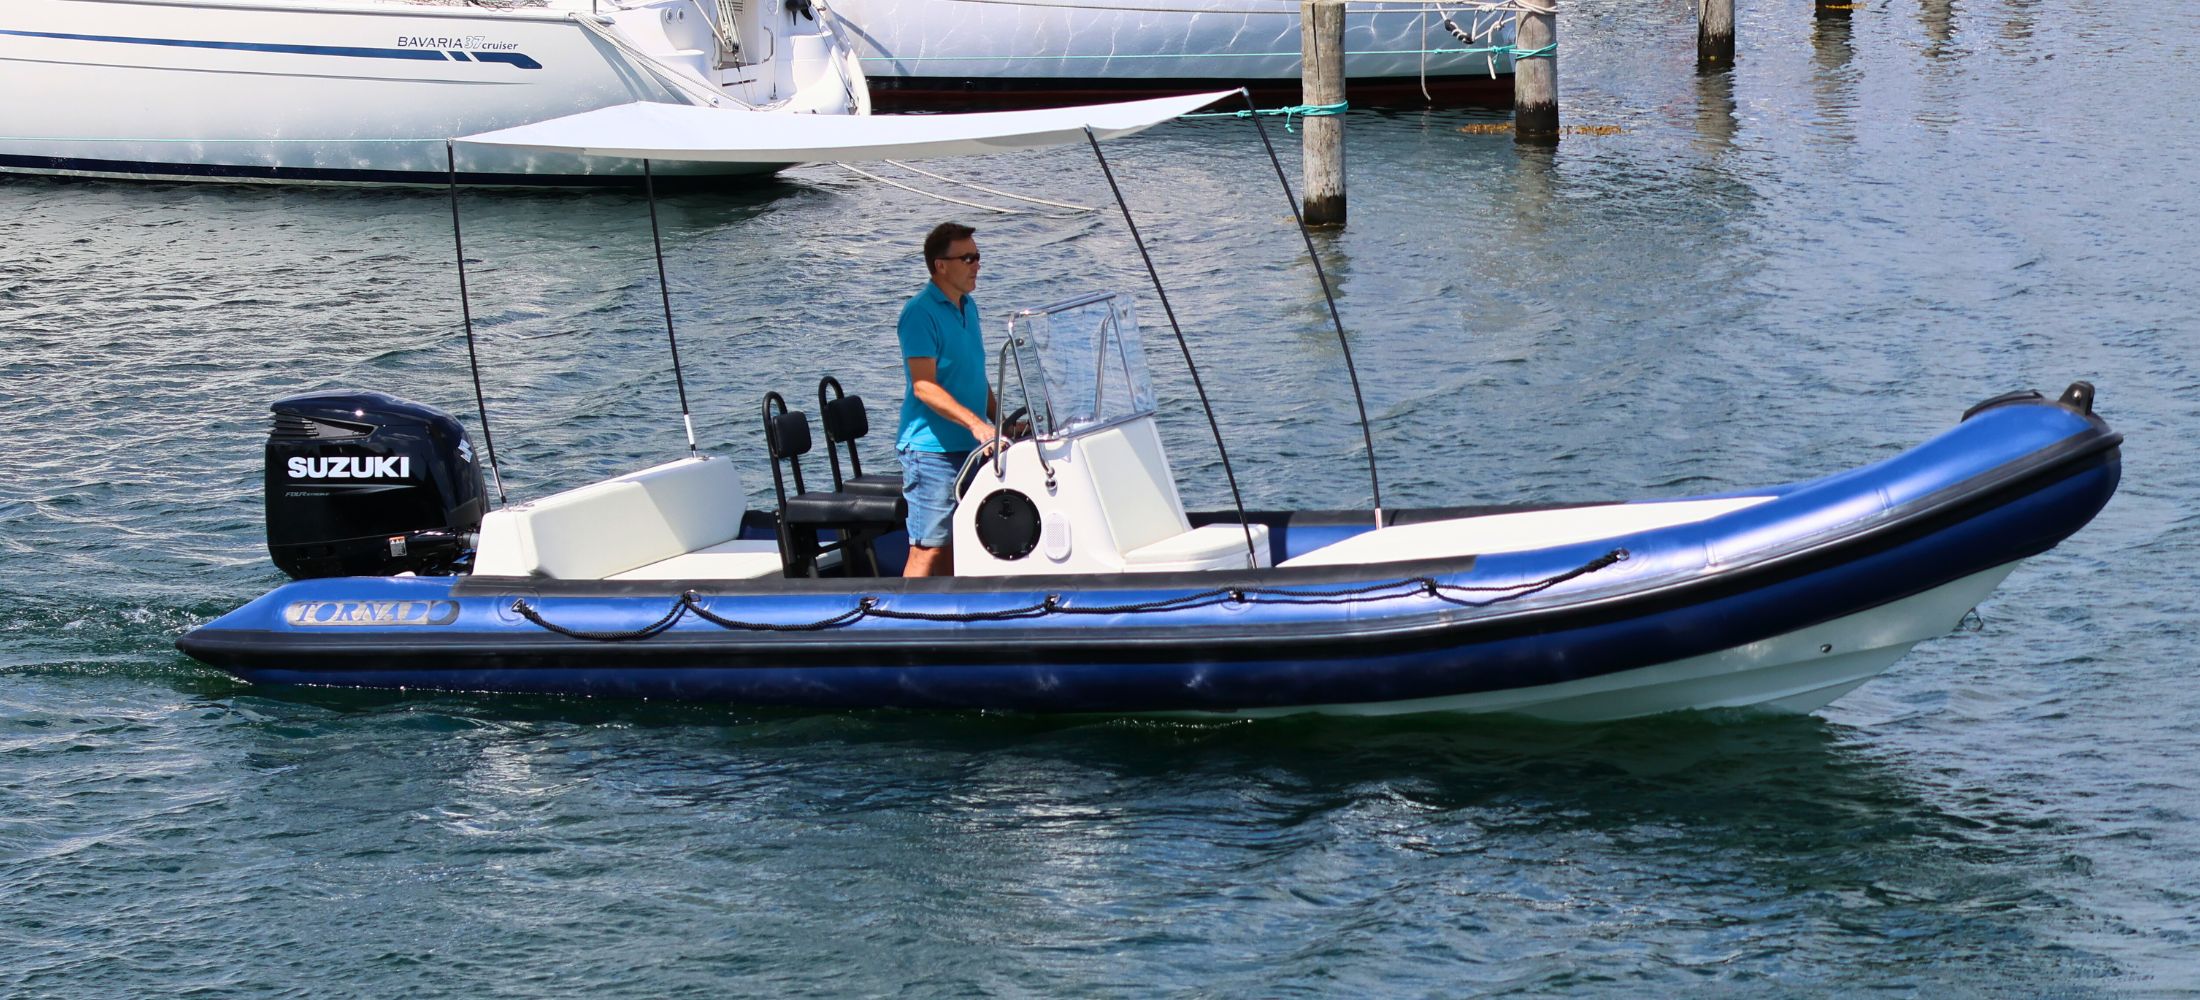 Tornado-7.8m-high-performance-rib-with-bimini-and-sundeck-for-relaxation-and-sun-bathing